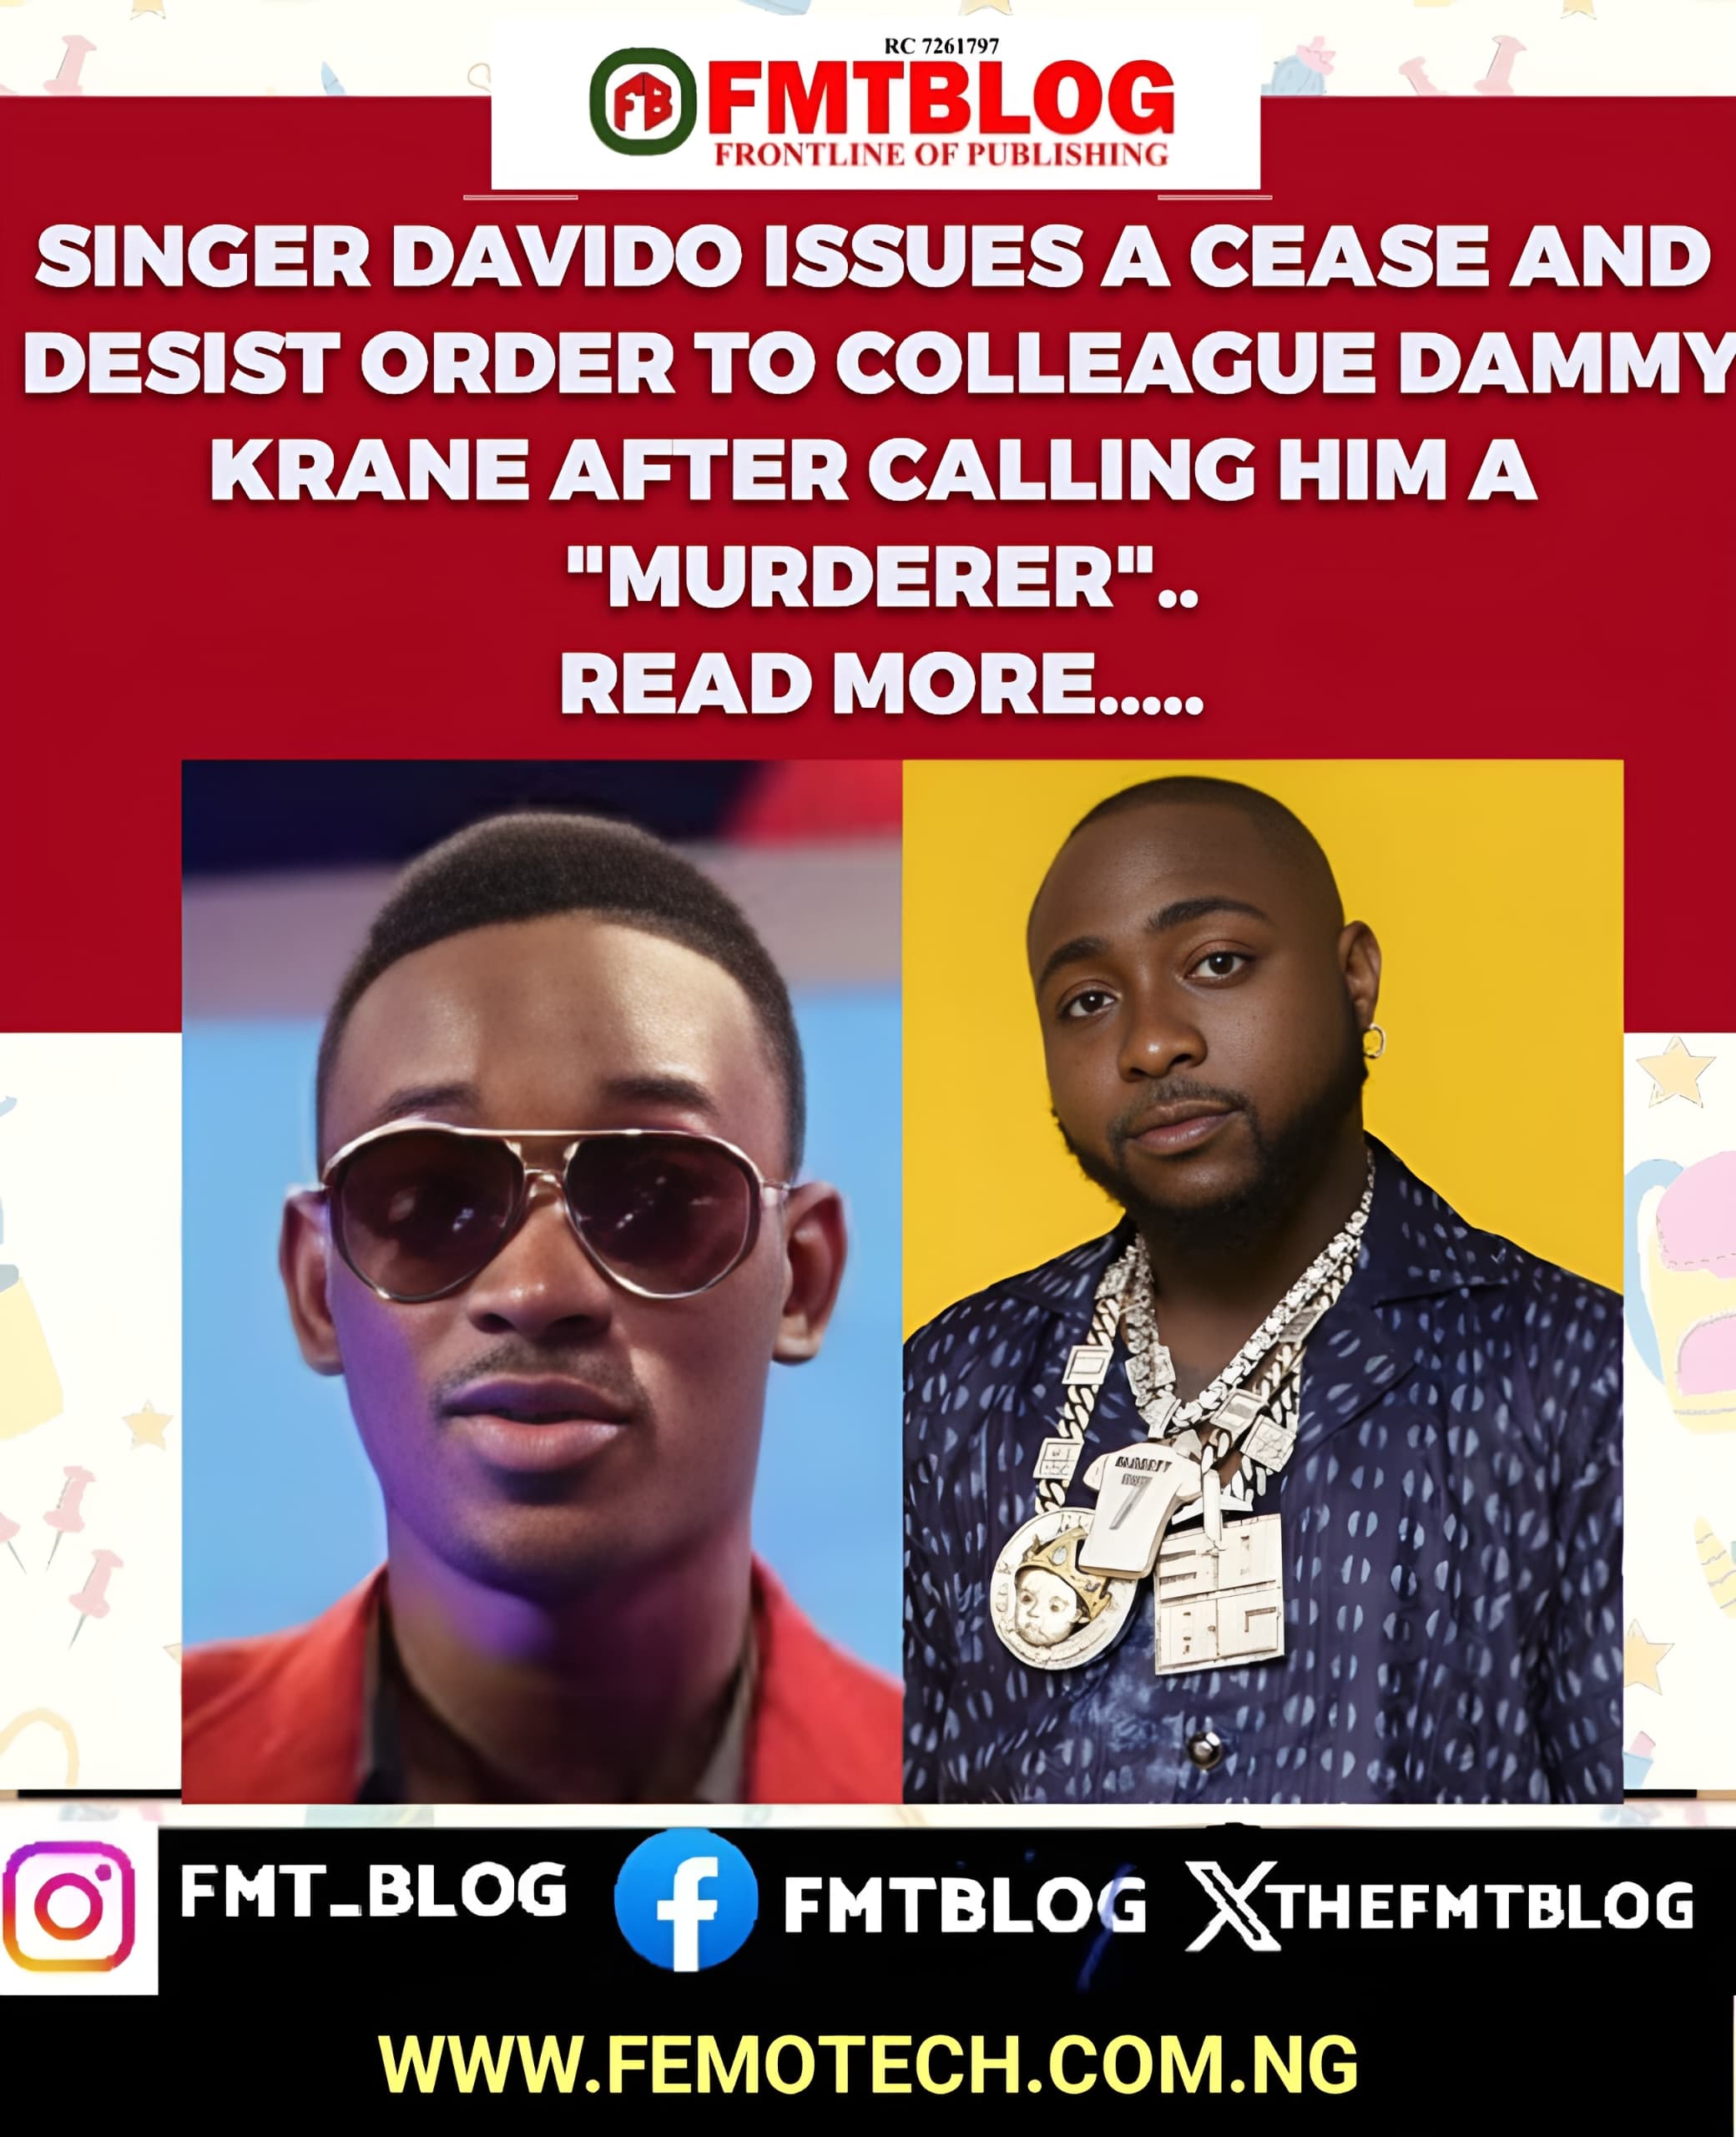 Singer Davido Issues A Cease And Desist Order To Colleague Dammy Krane After Calling Him A “Murderer”